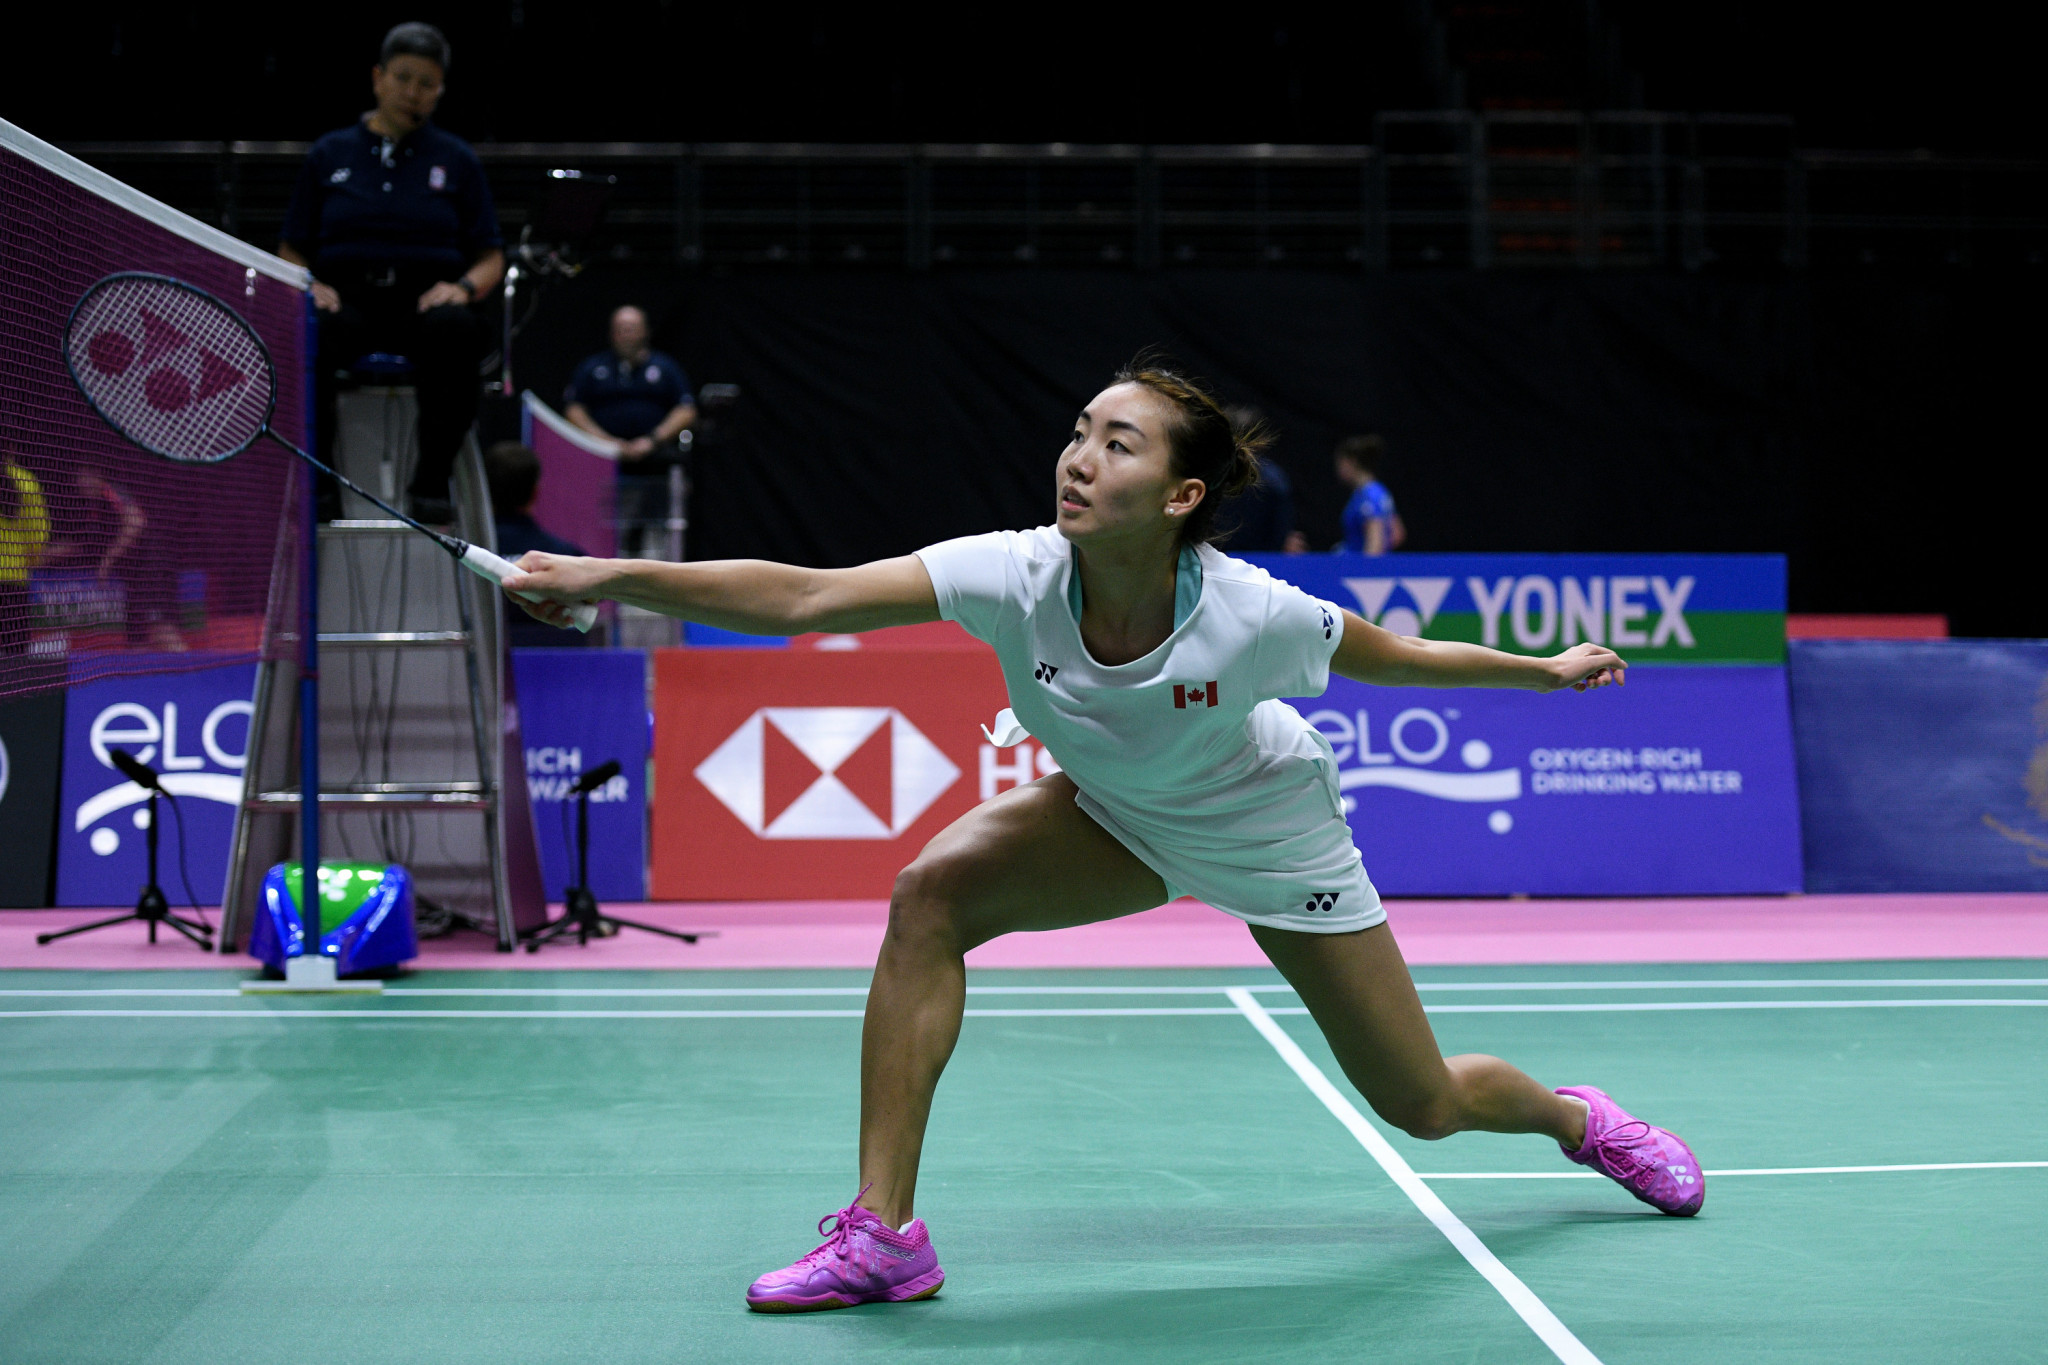 Home favourite Michelle Li is seeded first for this week's Badminton World Federation Canada Open in Calgary ©Getty Images